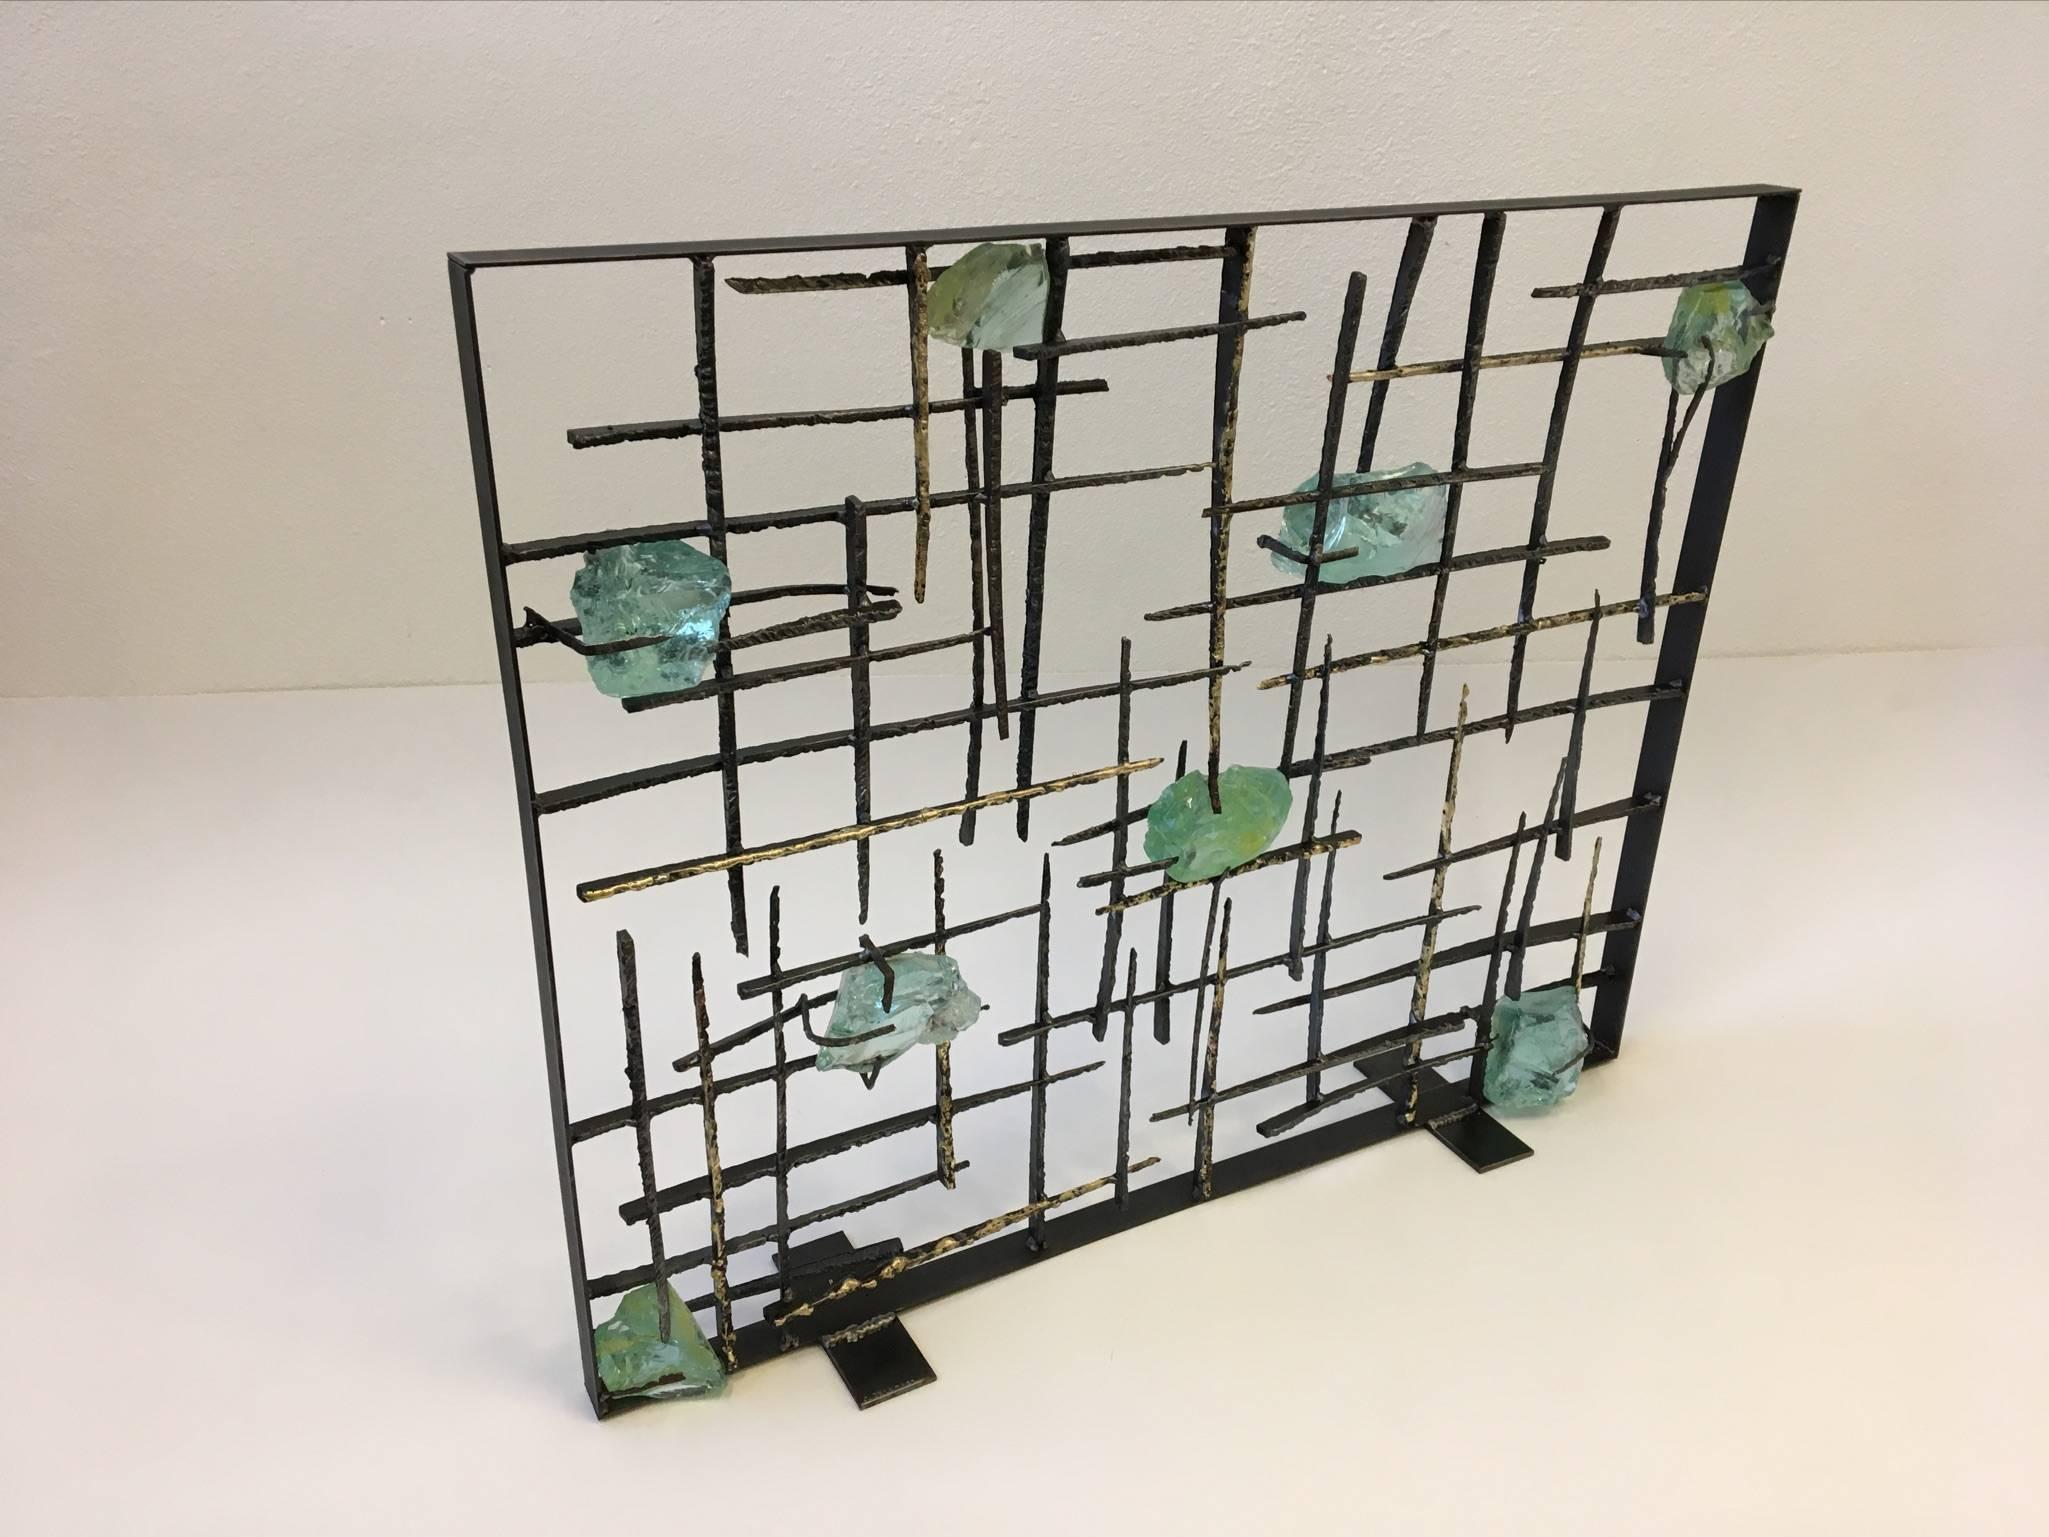 A beautiful Brutalist studio fireplace screen by American sculptor John De La Rosa. The screen is constructed of torch cut steel with randomly selected gilded edges with brass on some pieces and clear green with hints of yellow slag glass ( see